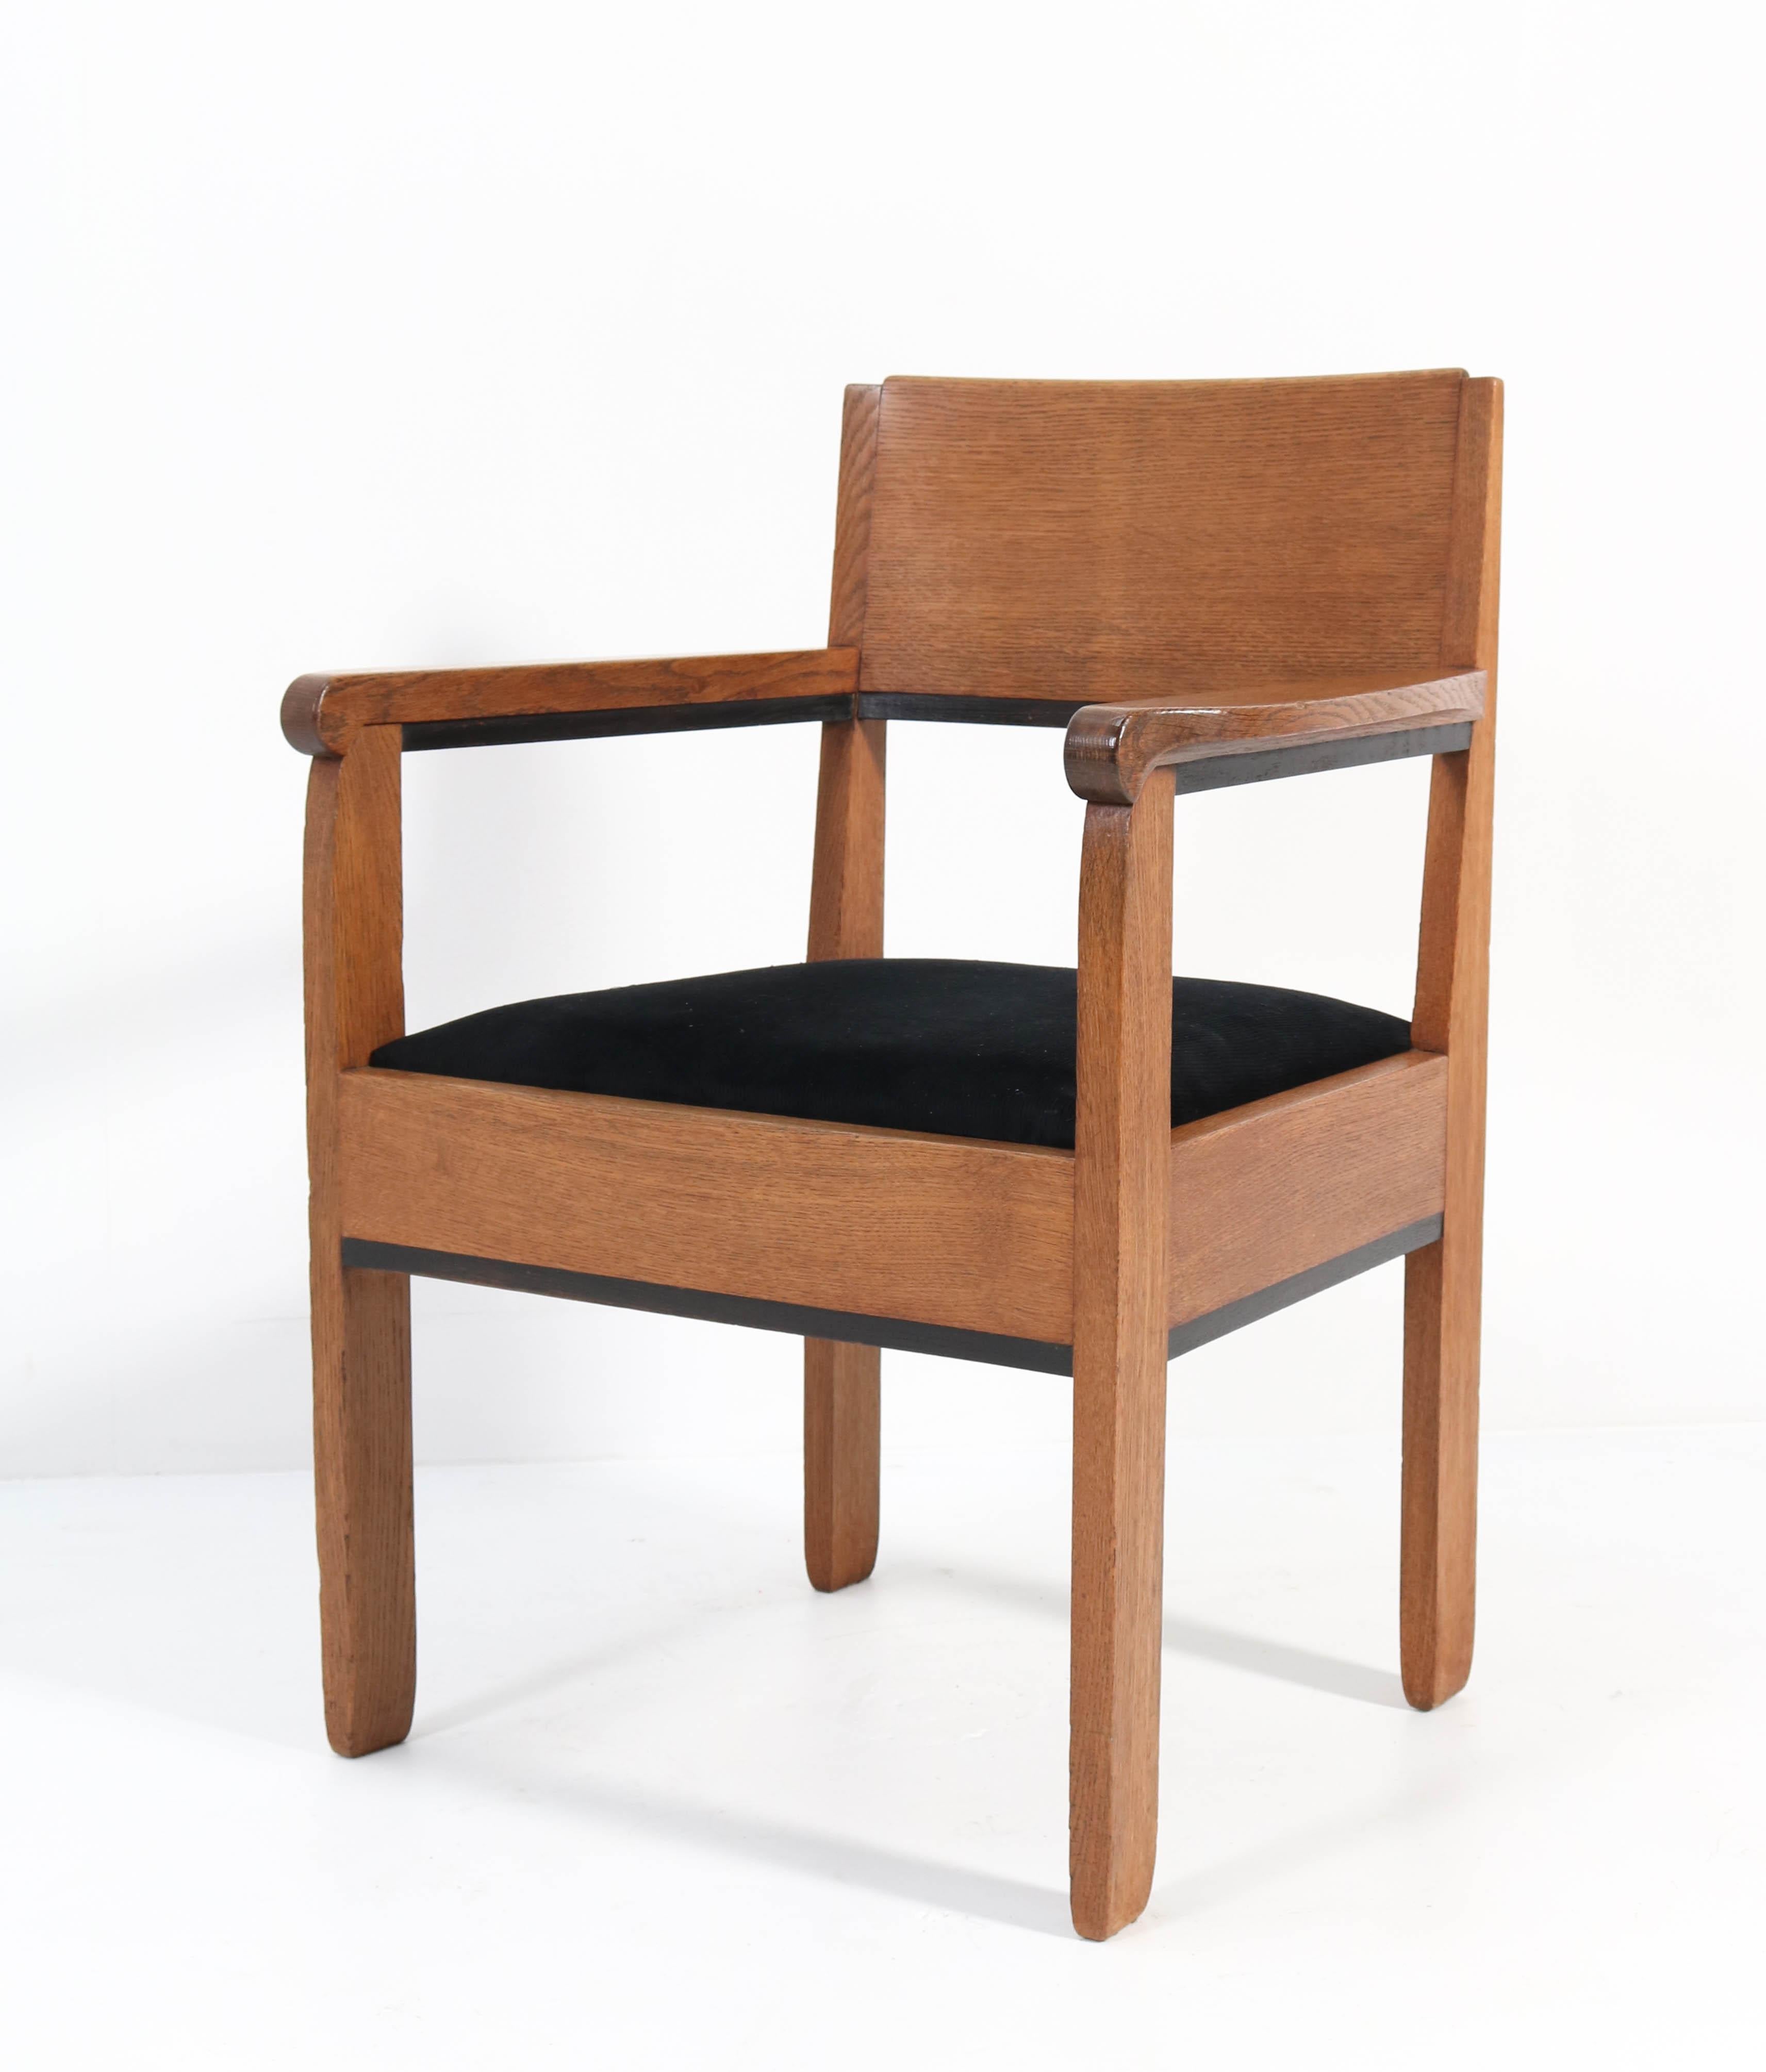 Stunning and rare Art Deco Haagse School armchair.
Design by Frits Spanjaard for L.O.V. Oosterbeek.
Striking Dutch design from the twenties.
Solid oak and the seat is re-upholstered with black Manchester fabric.
Marked with original